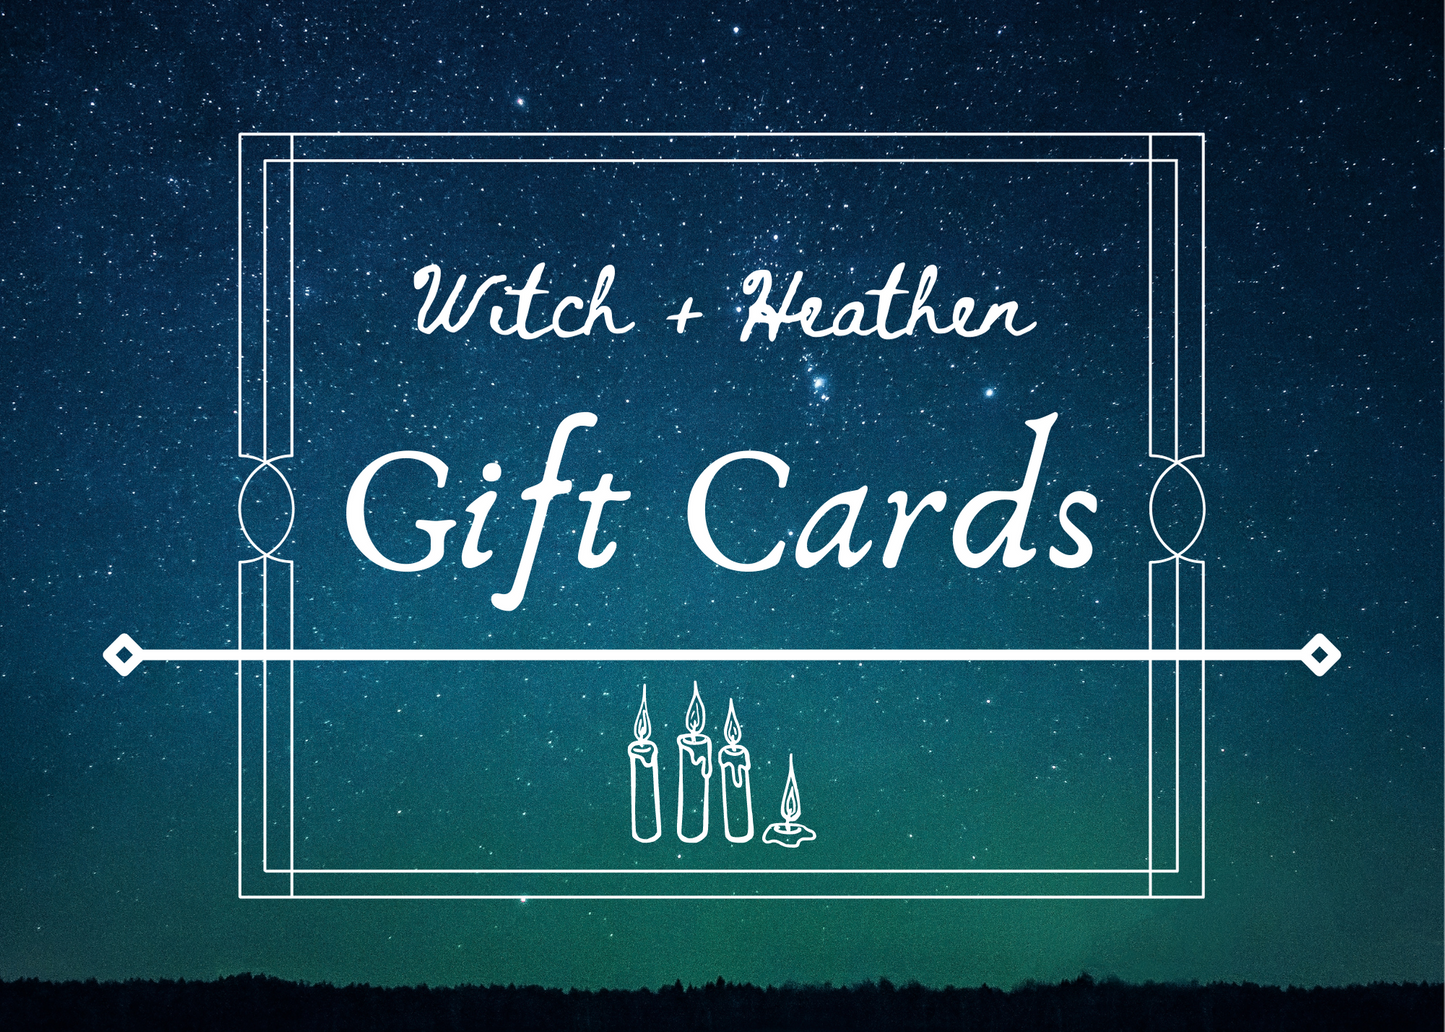 Witch and Heathen Gift Card